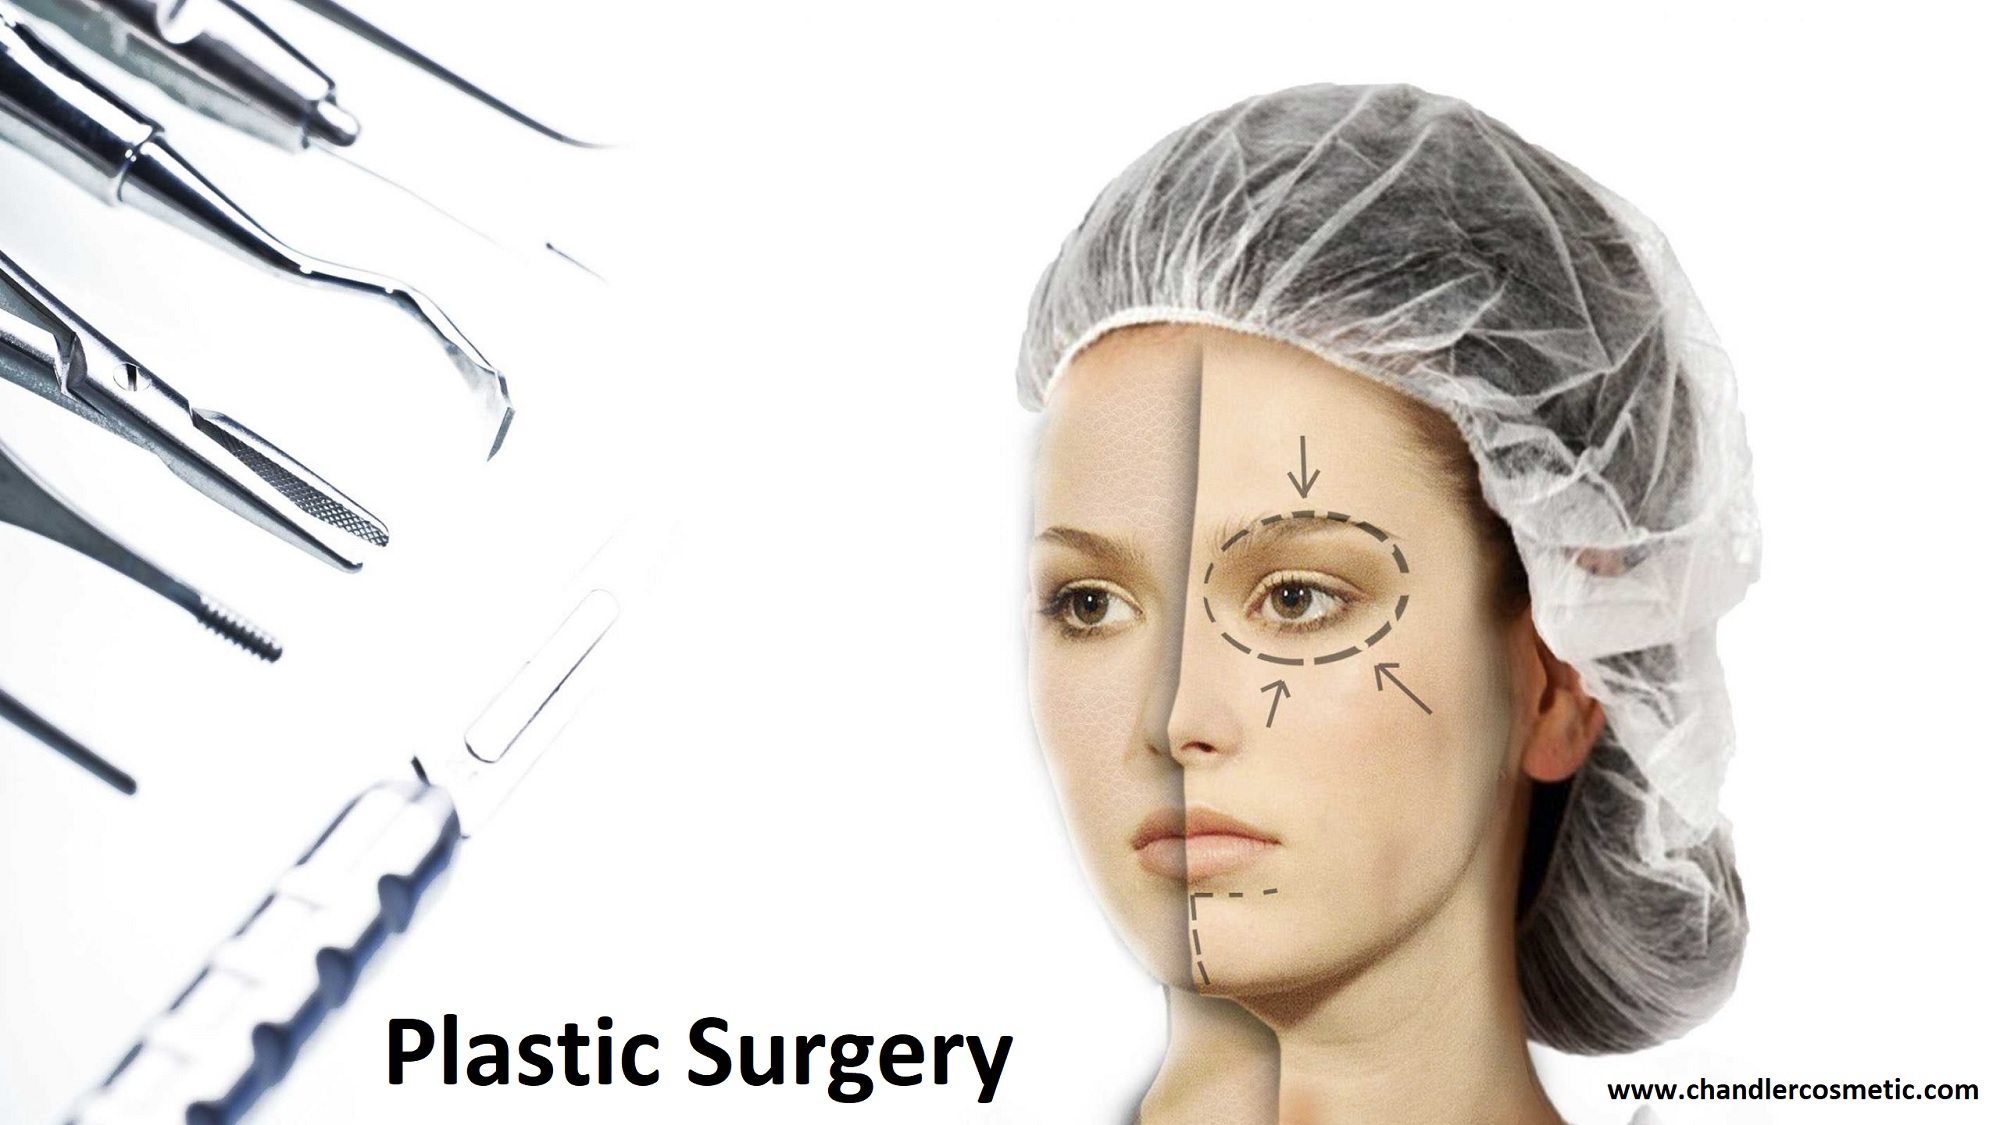 Looking for Low-Cost Plastic Surgery in Philadelphia